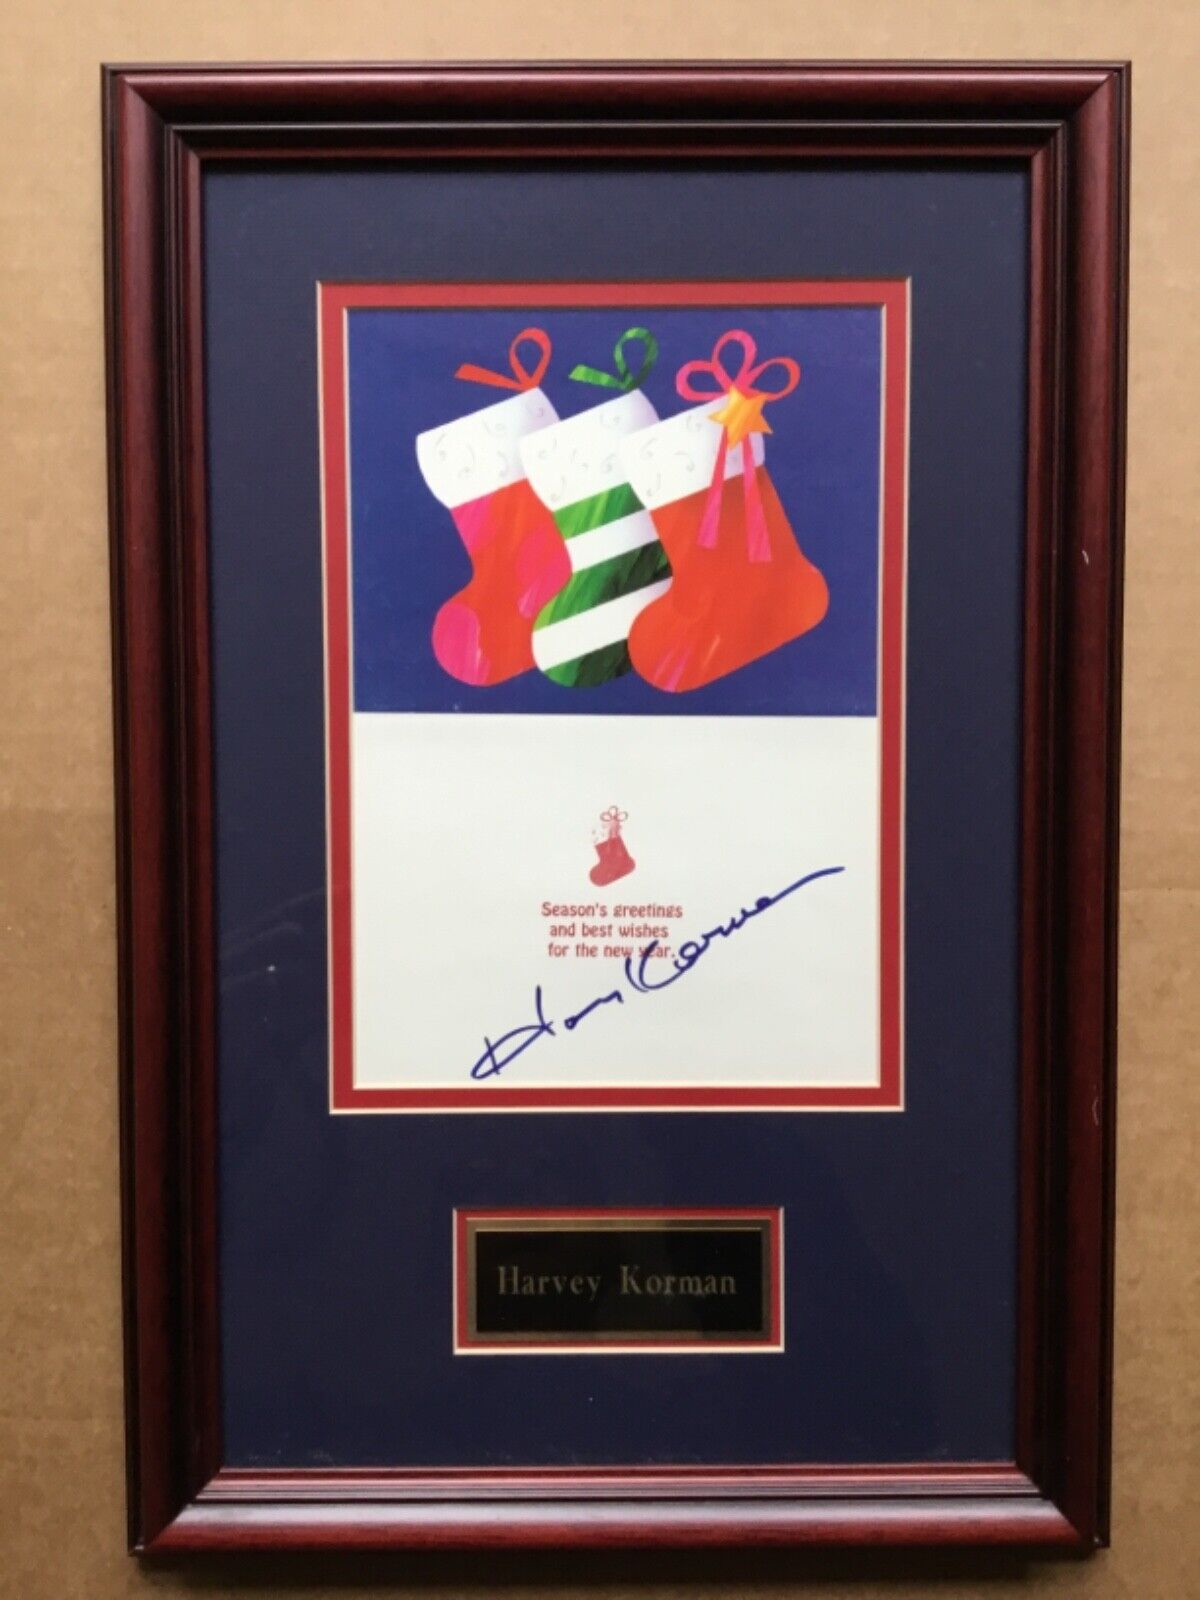 Rare Harvey Korman In-Person Signed Christmas Card with Custom Framing 